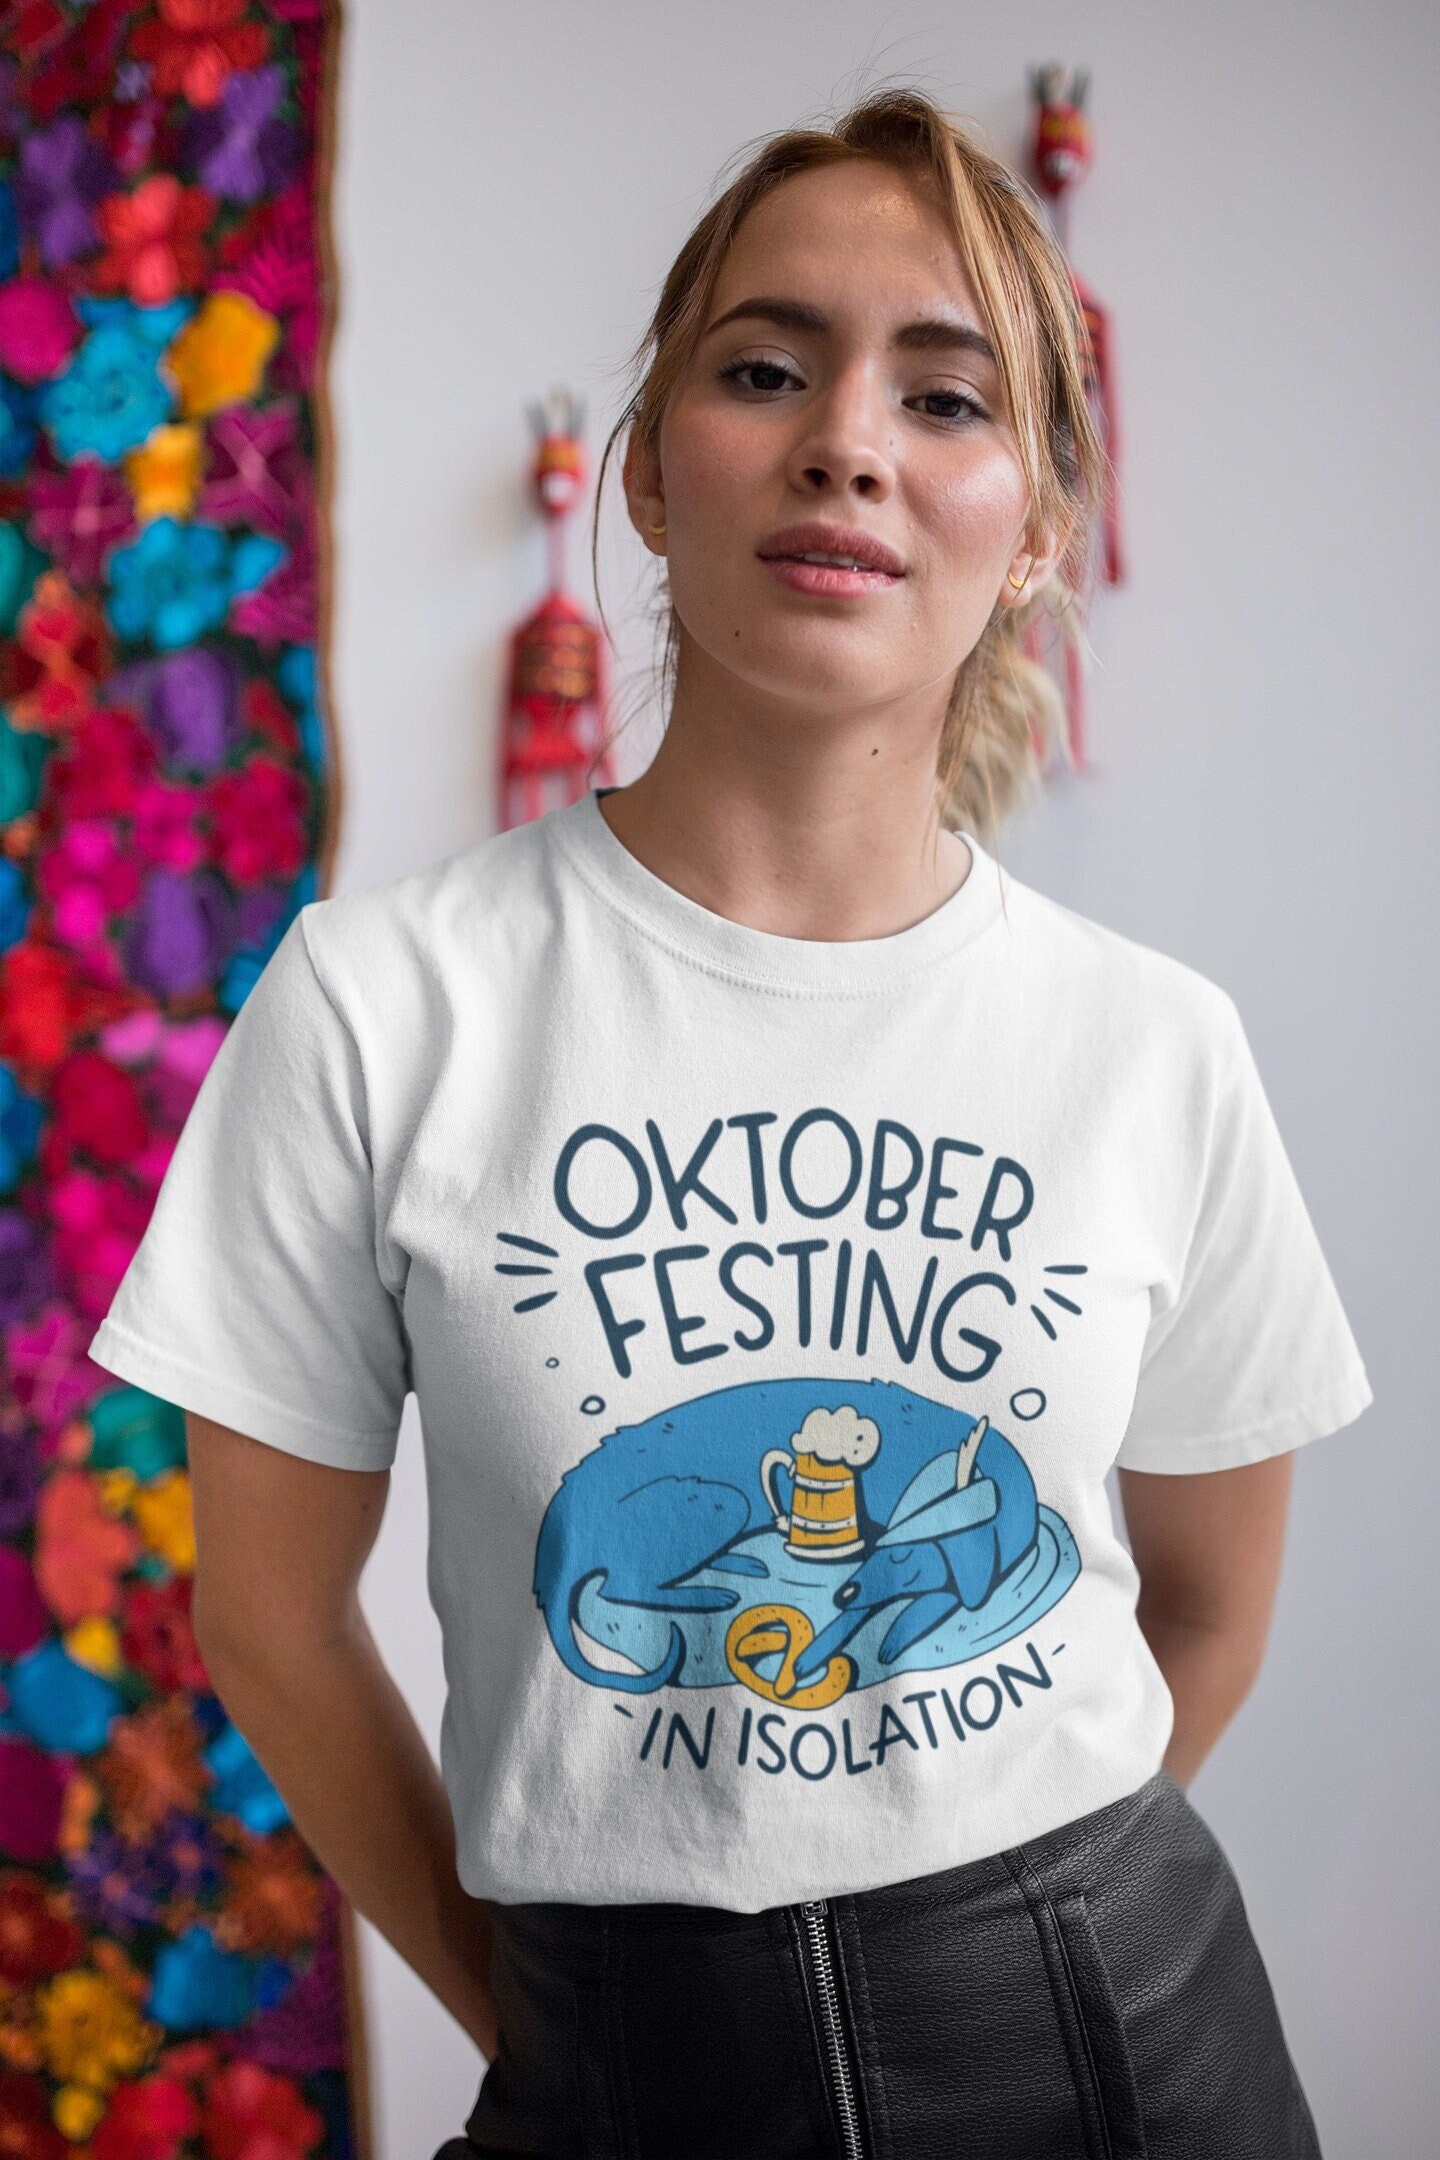 Discover Oktoberfesting In Isolation Shirt, Funny Oktoberfest Shirt, Oktoberfest Party Gift Shirt, German Oktoberfest Shirt, Oktoberfest Beer Shirt